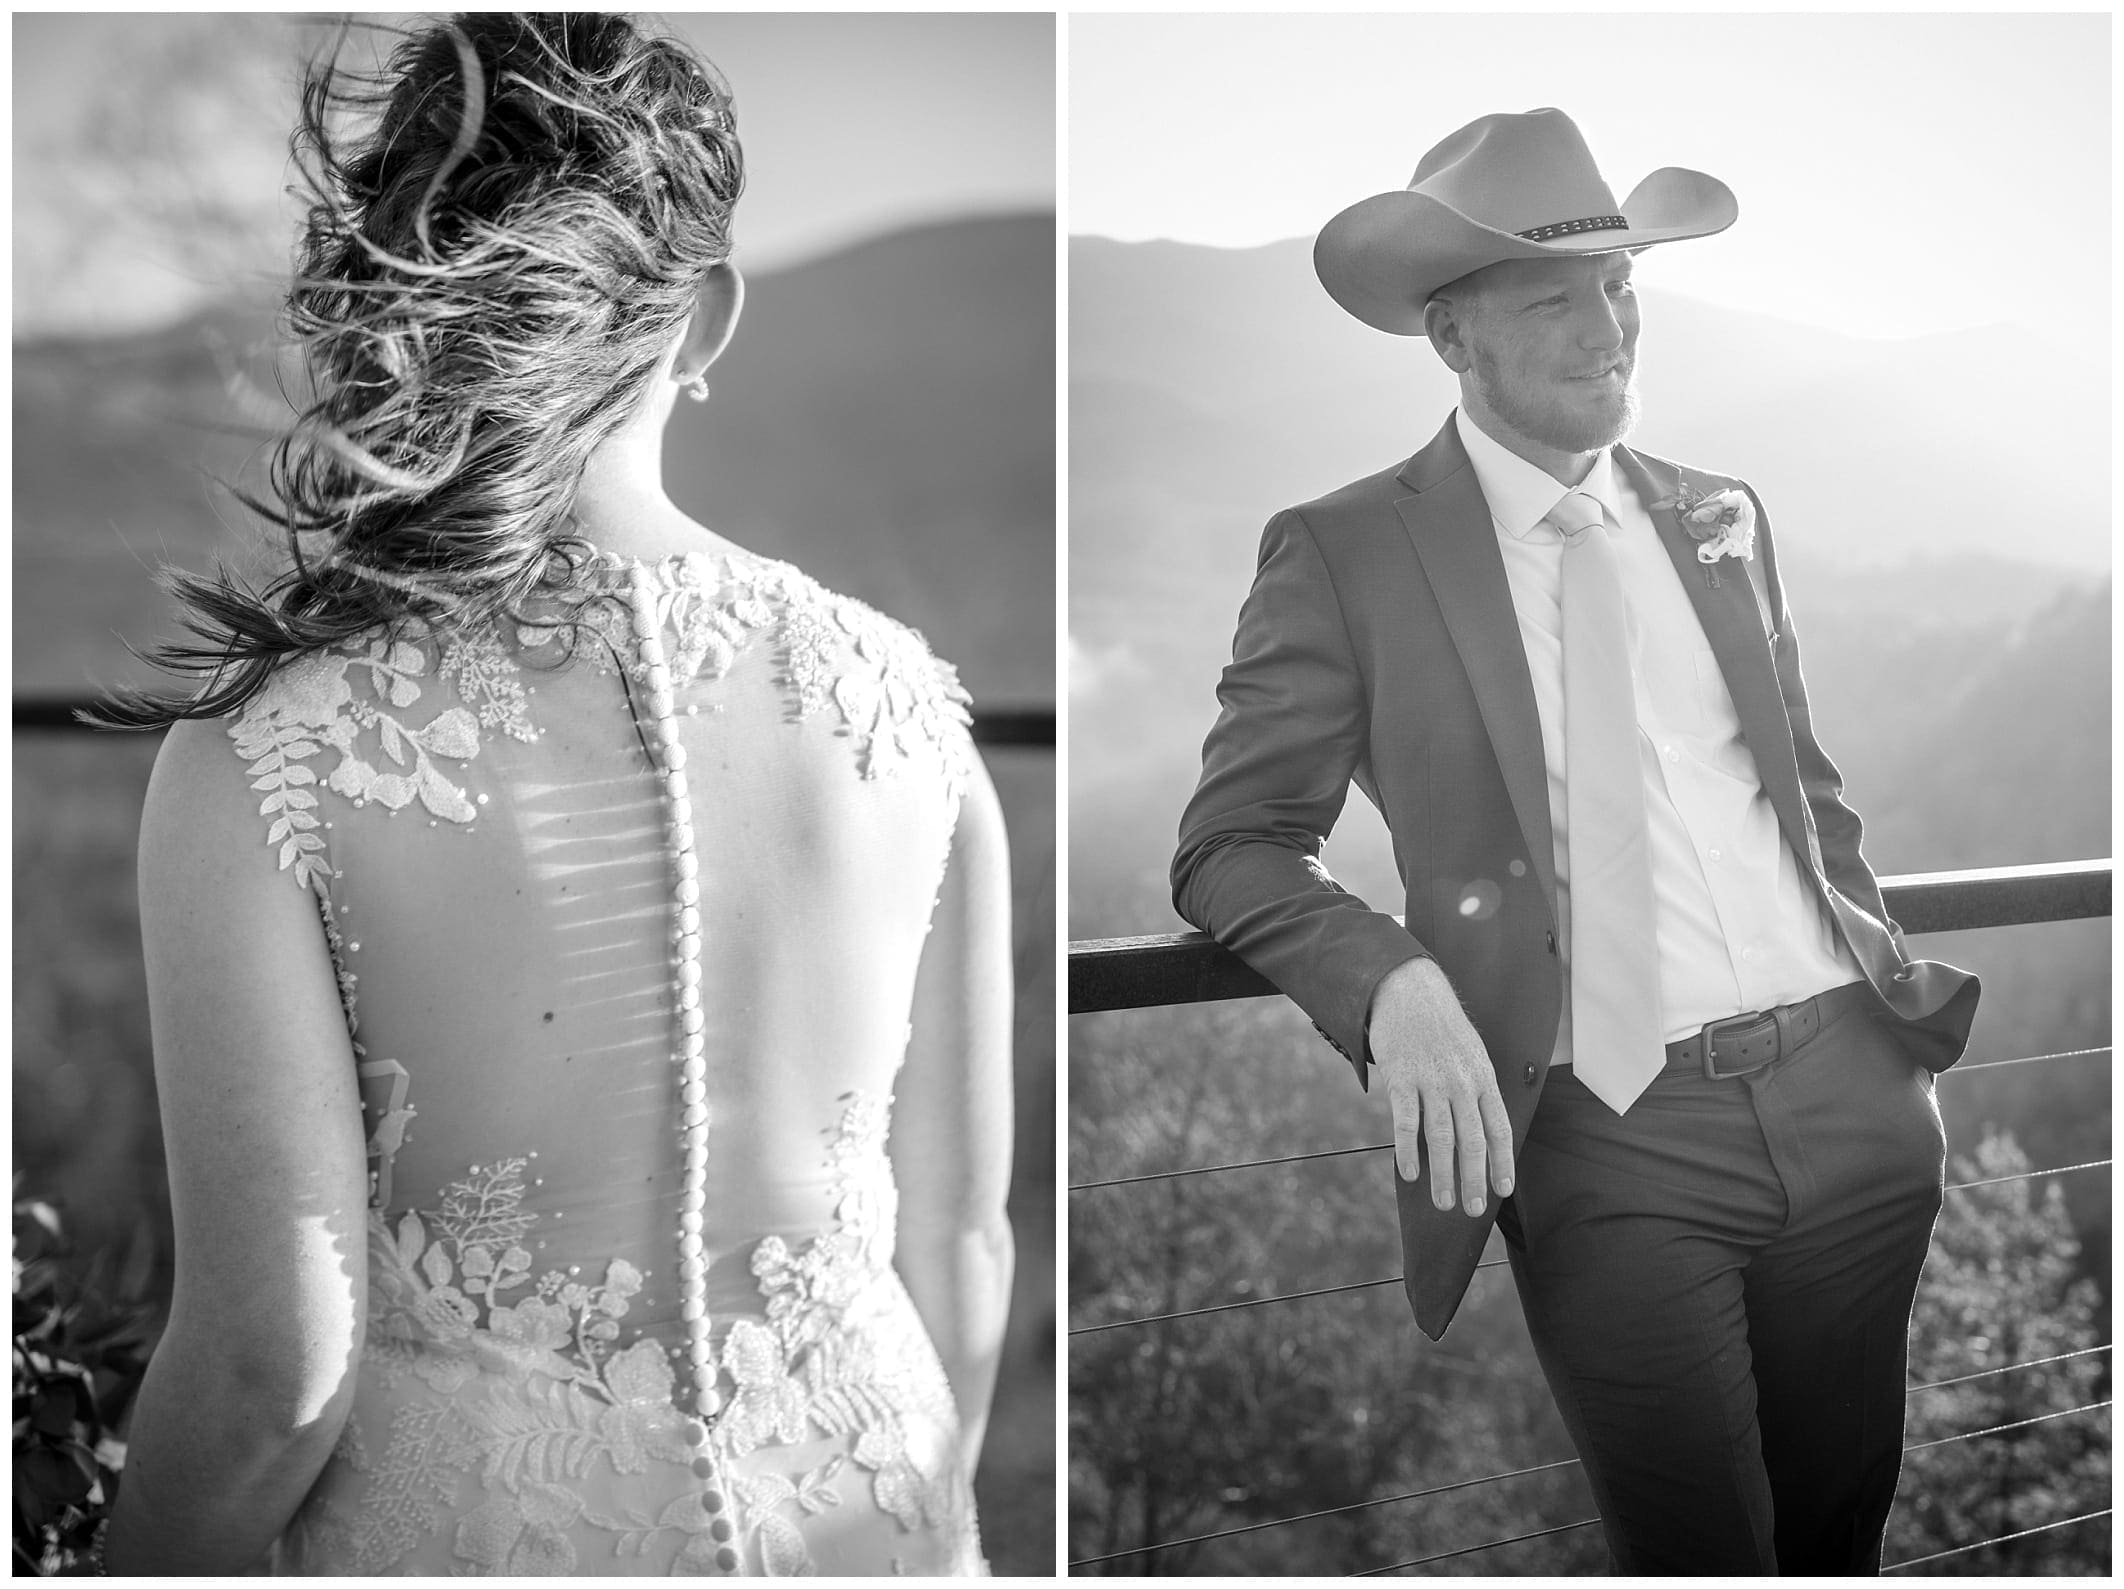 back of bride's dress with the wind blowing in her hair - groom portrait in black and white